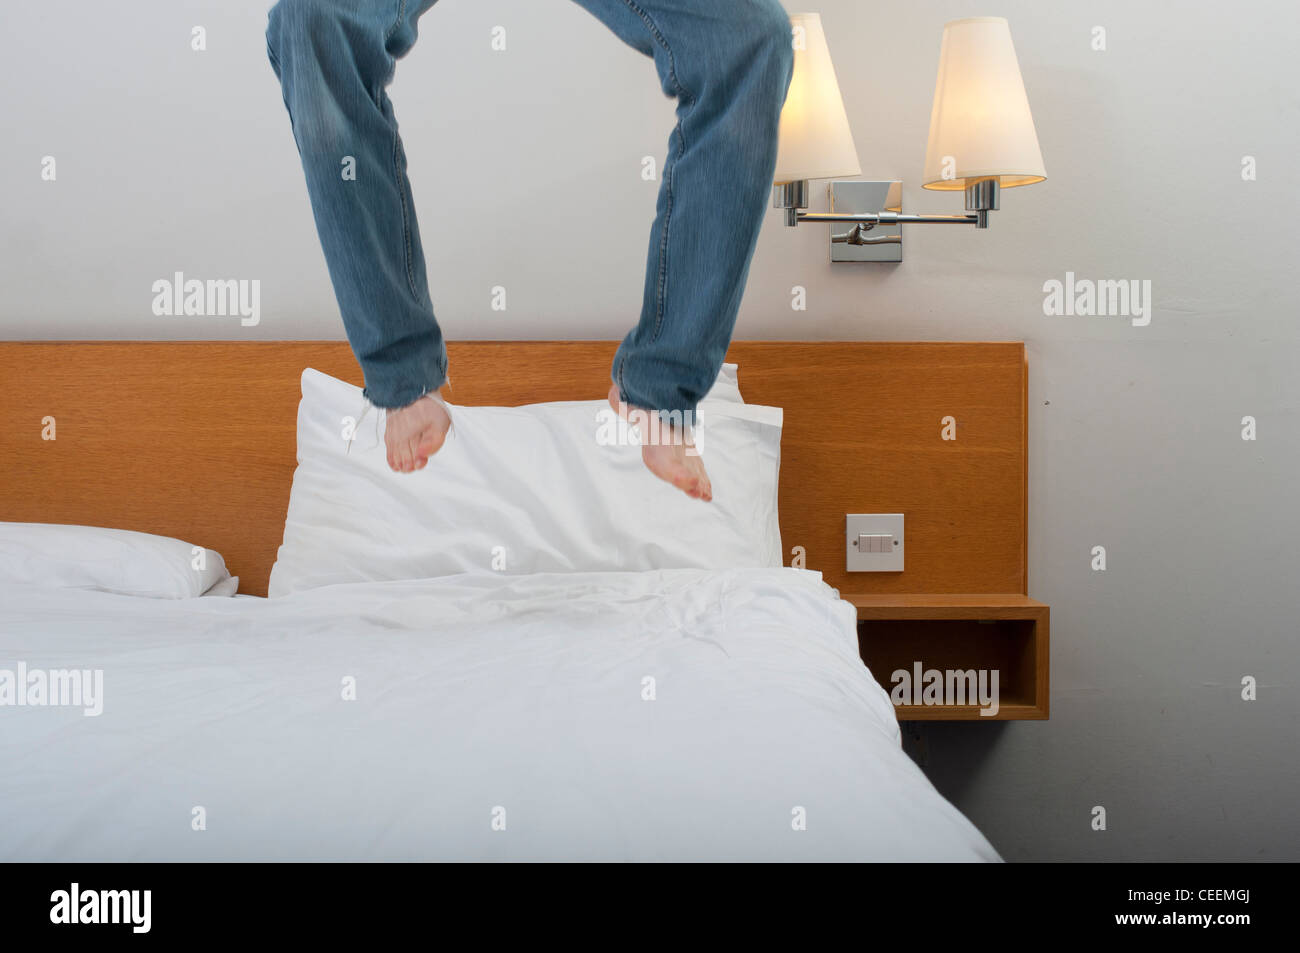 Bouncing on bed in hotel room legs in air above mattress. Stock Photo